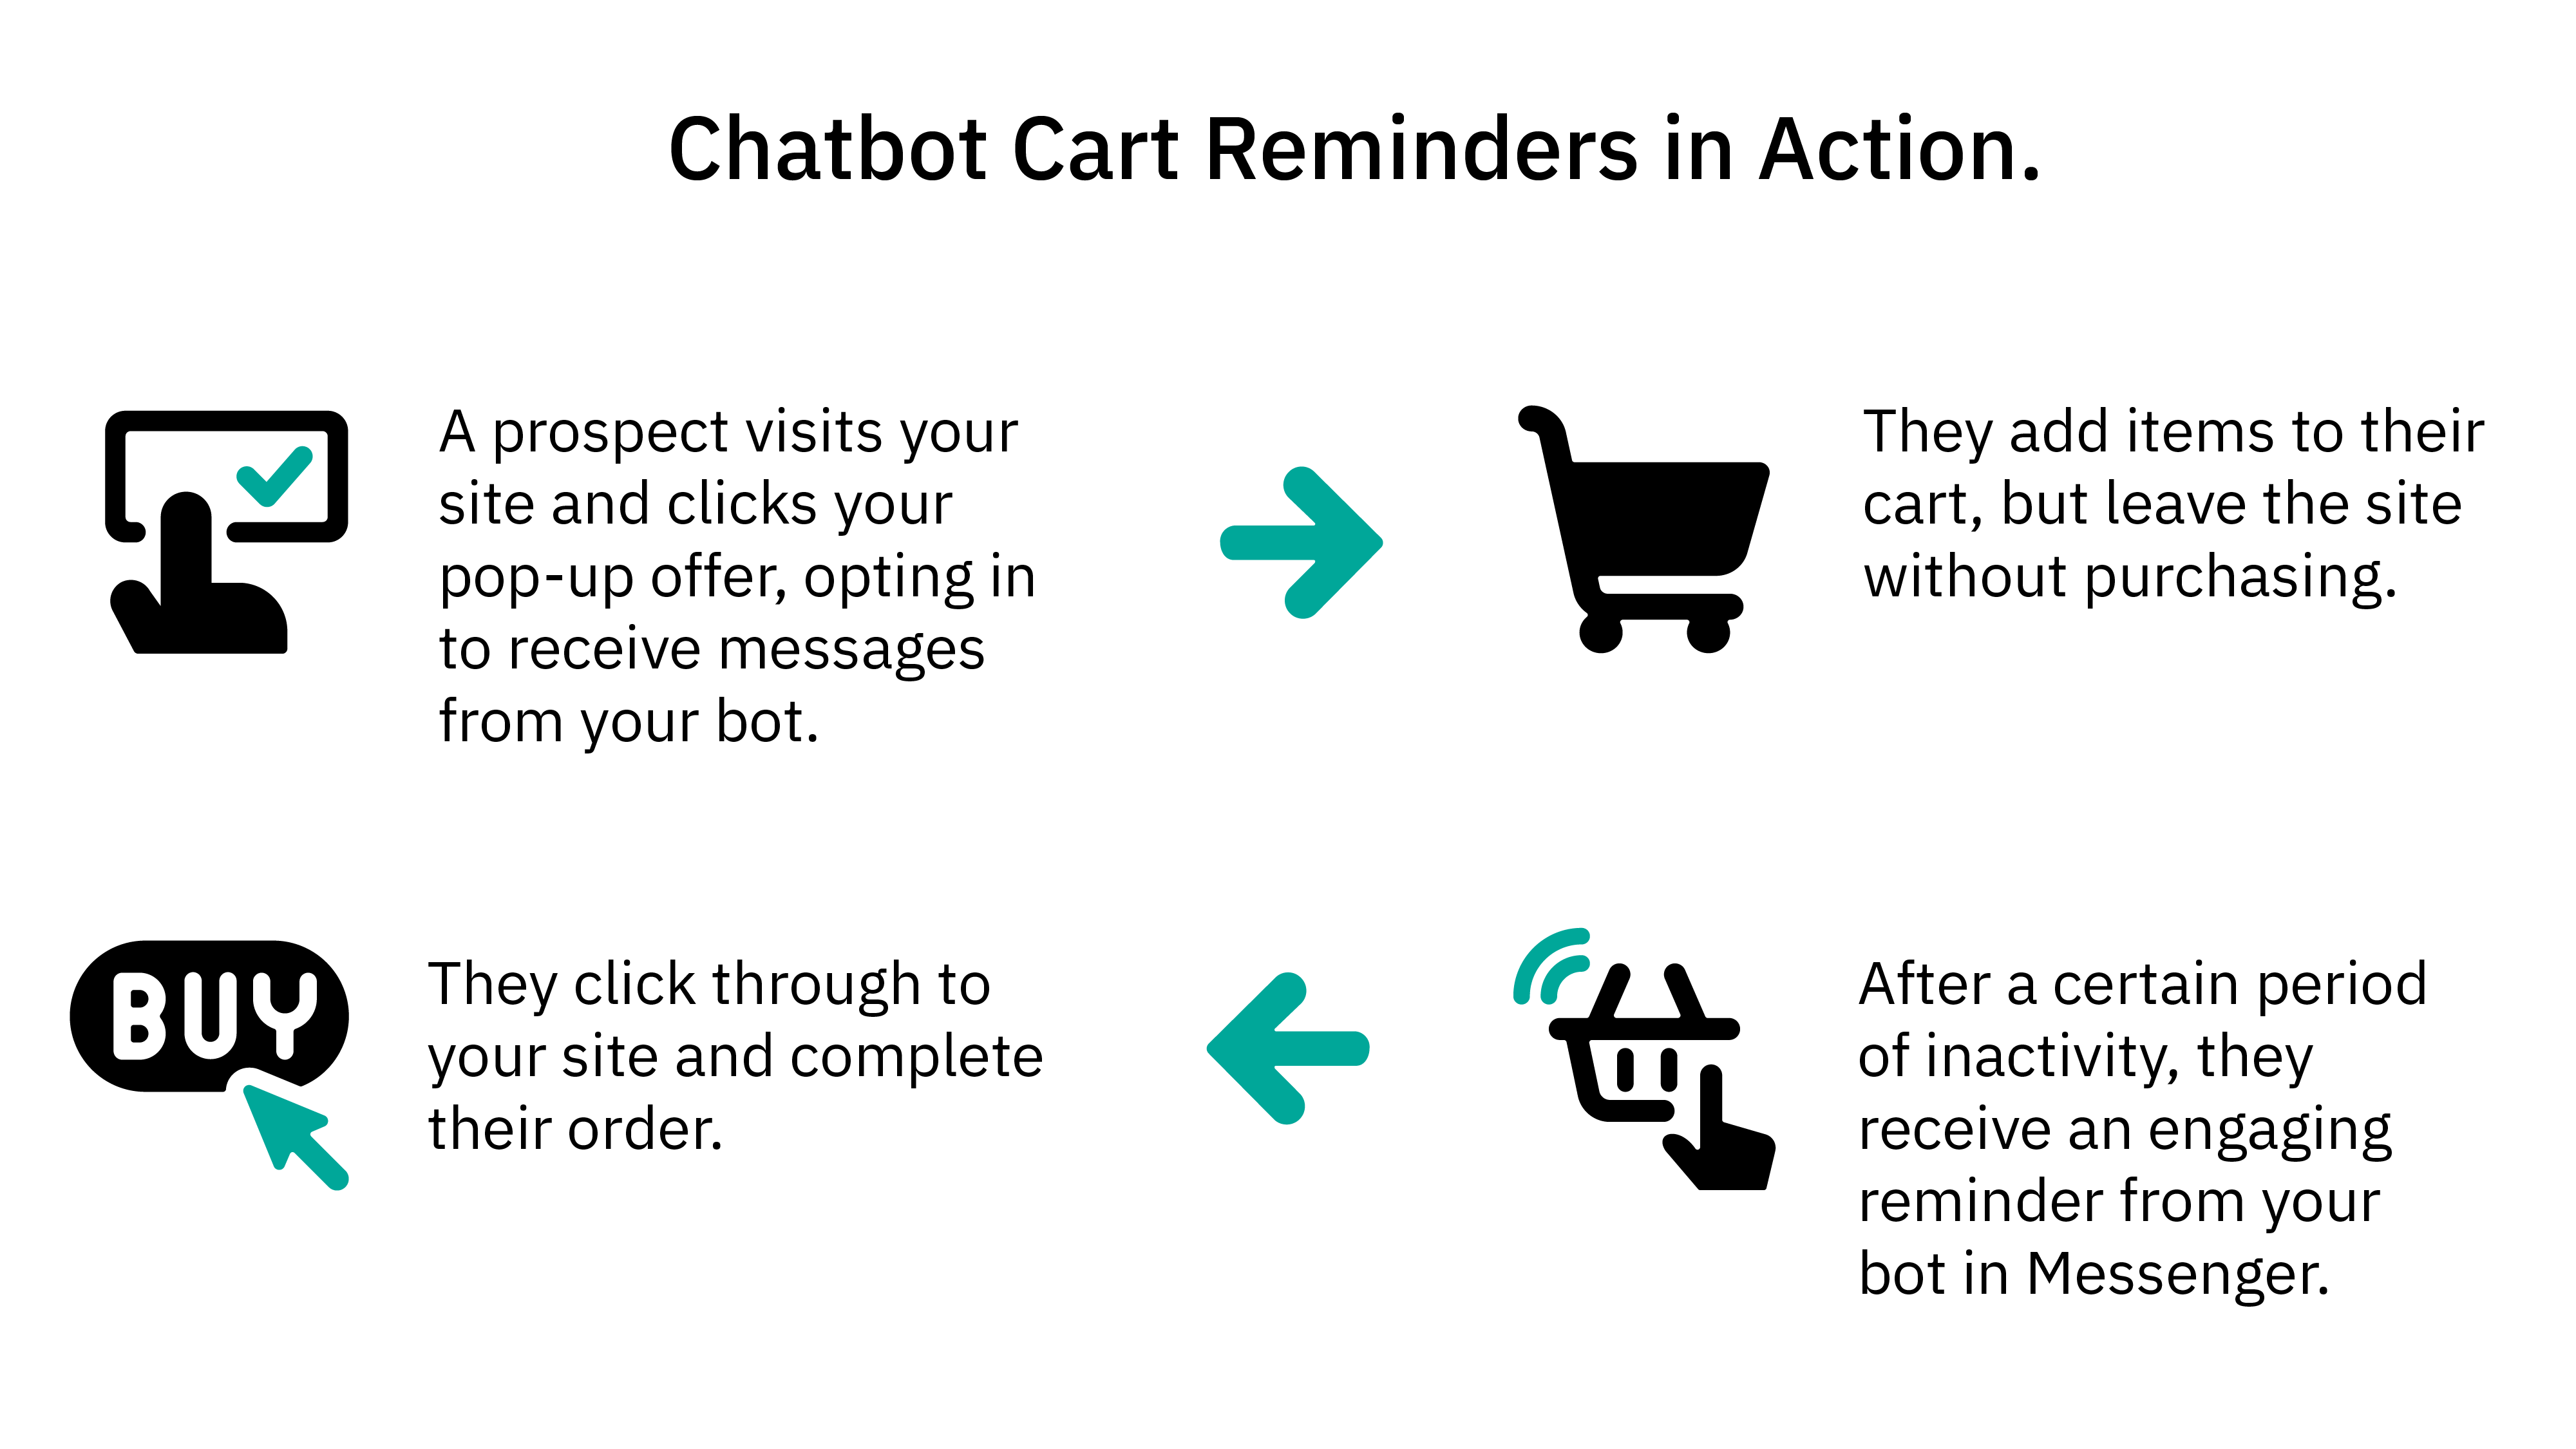 Chatbot cart reminders in action